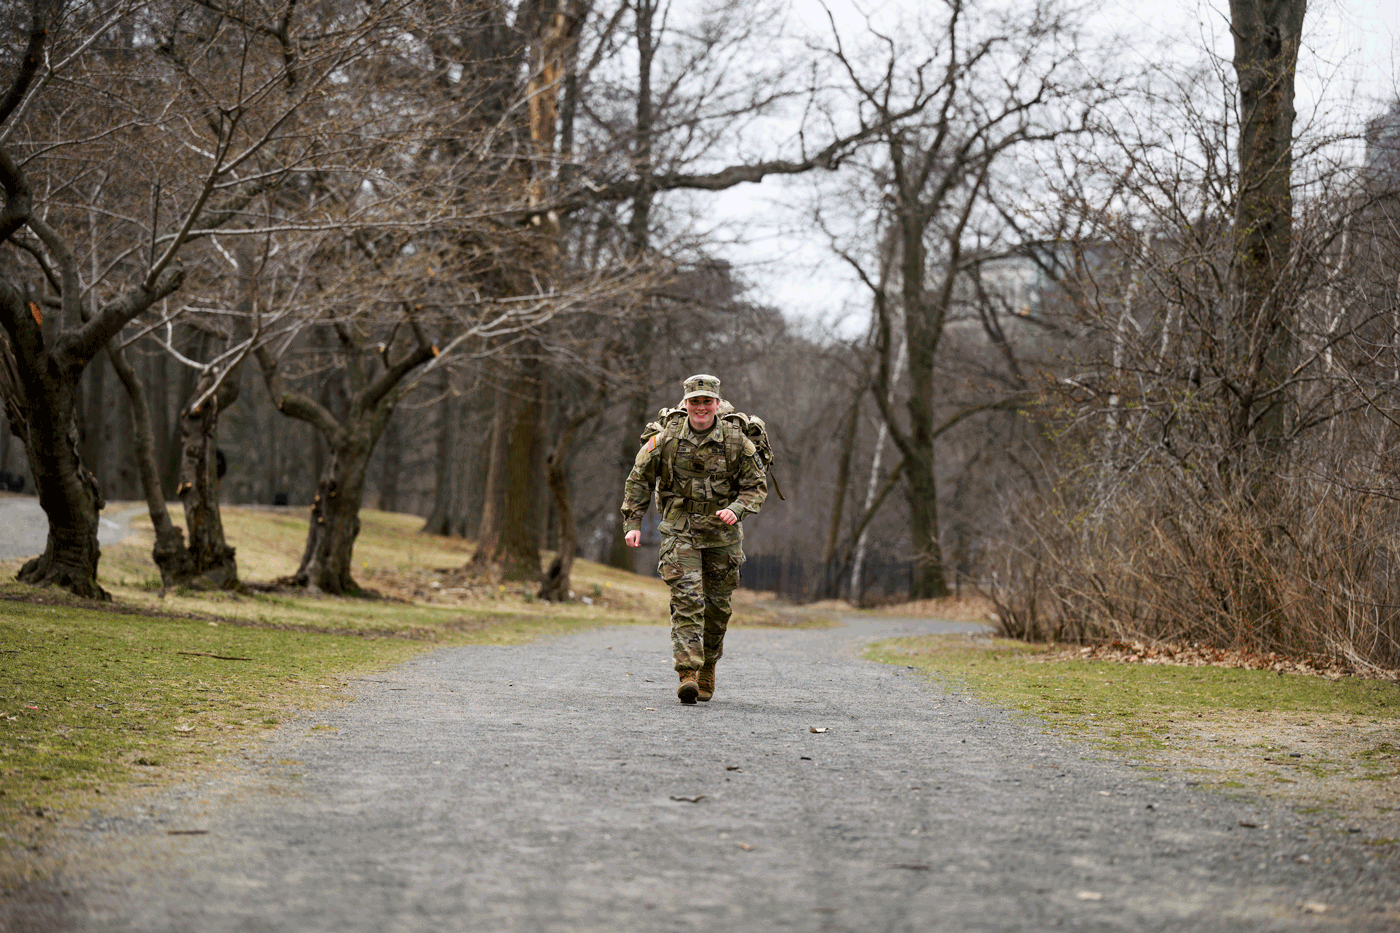 Kayla McCann running on a road, wearing a uniform and military backpack.